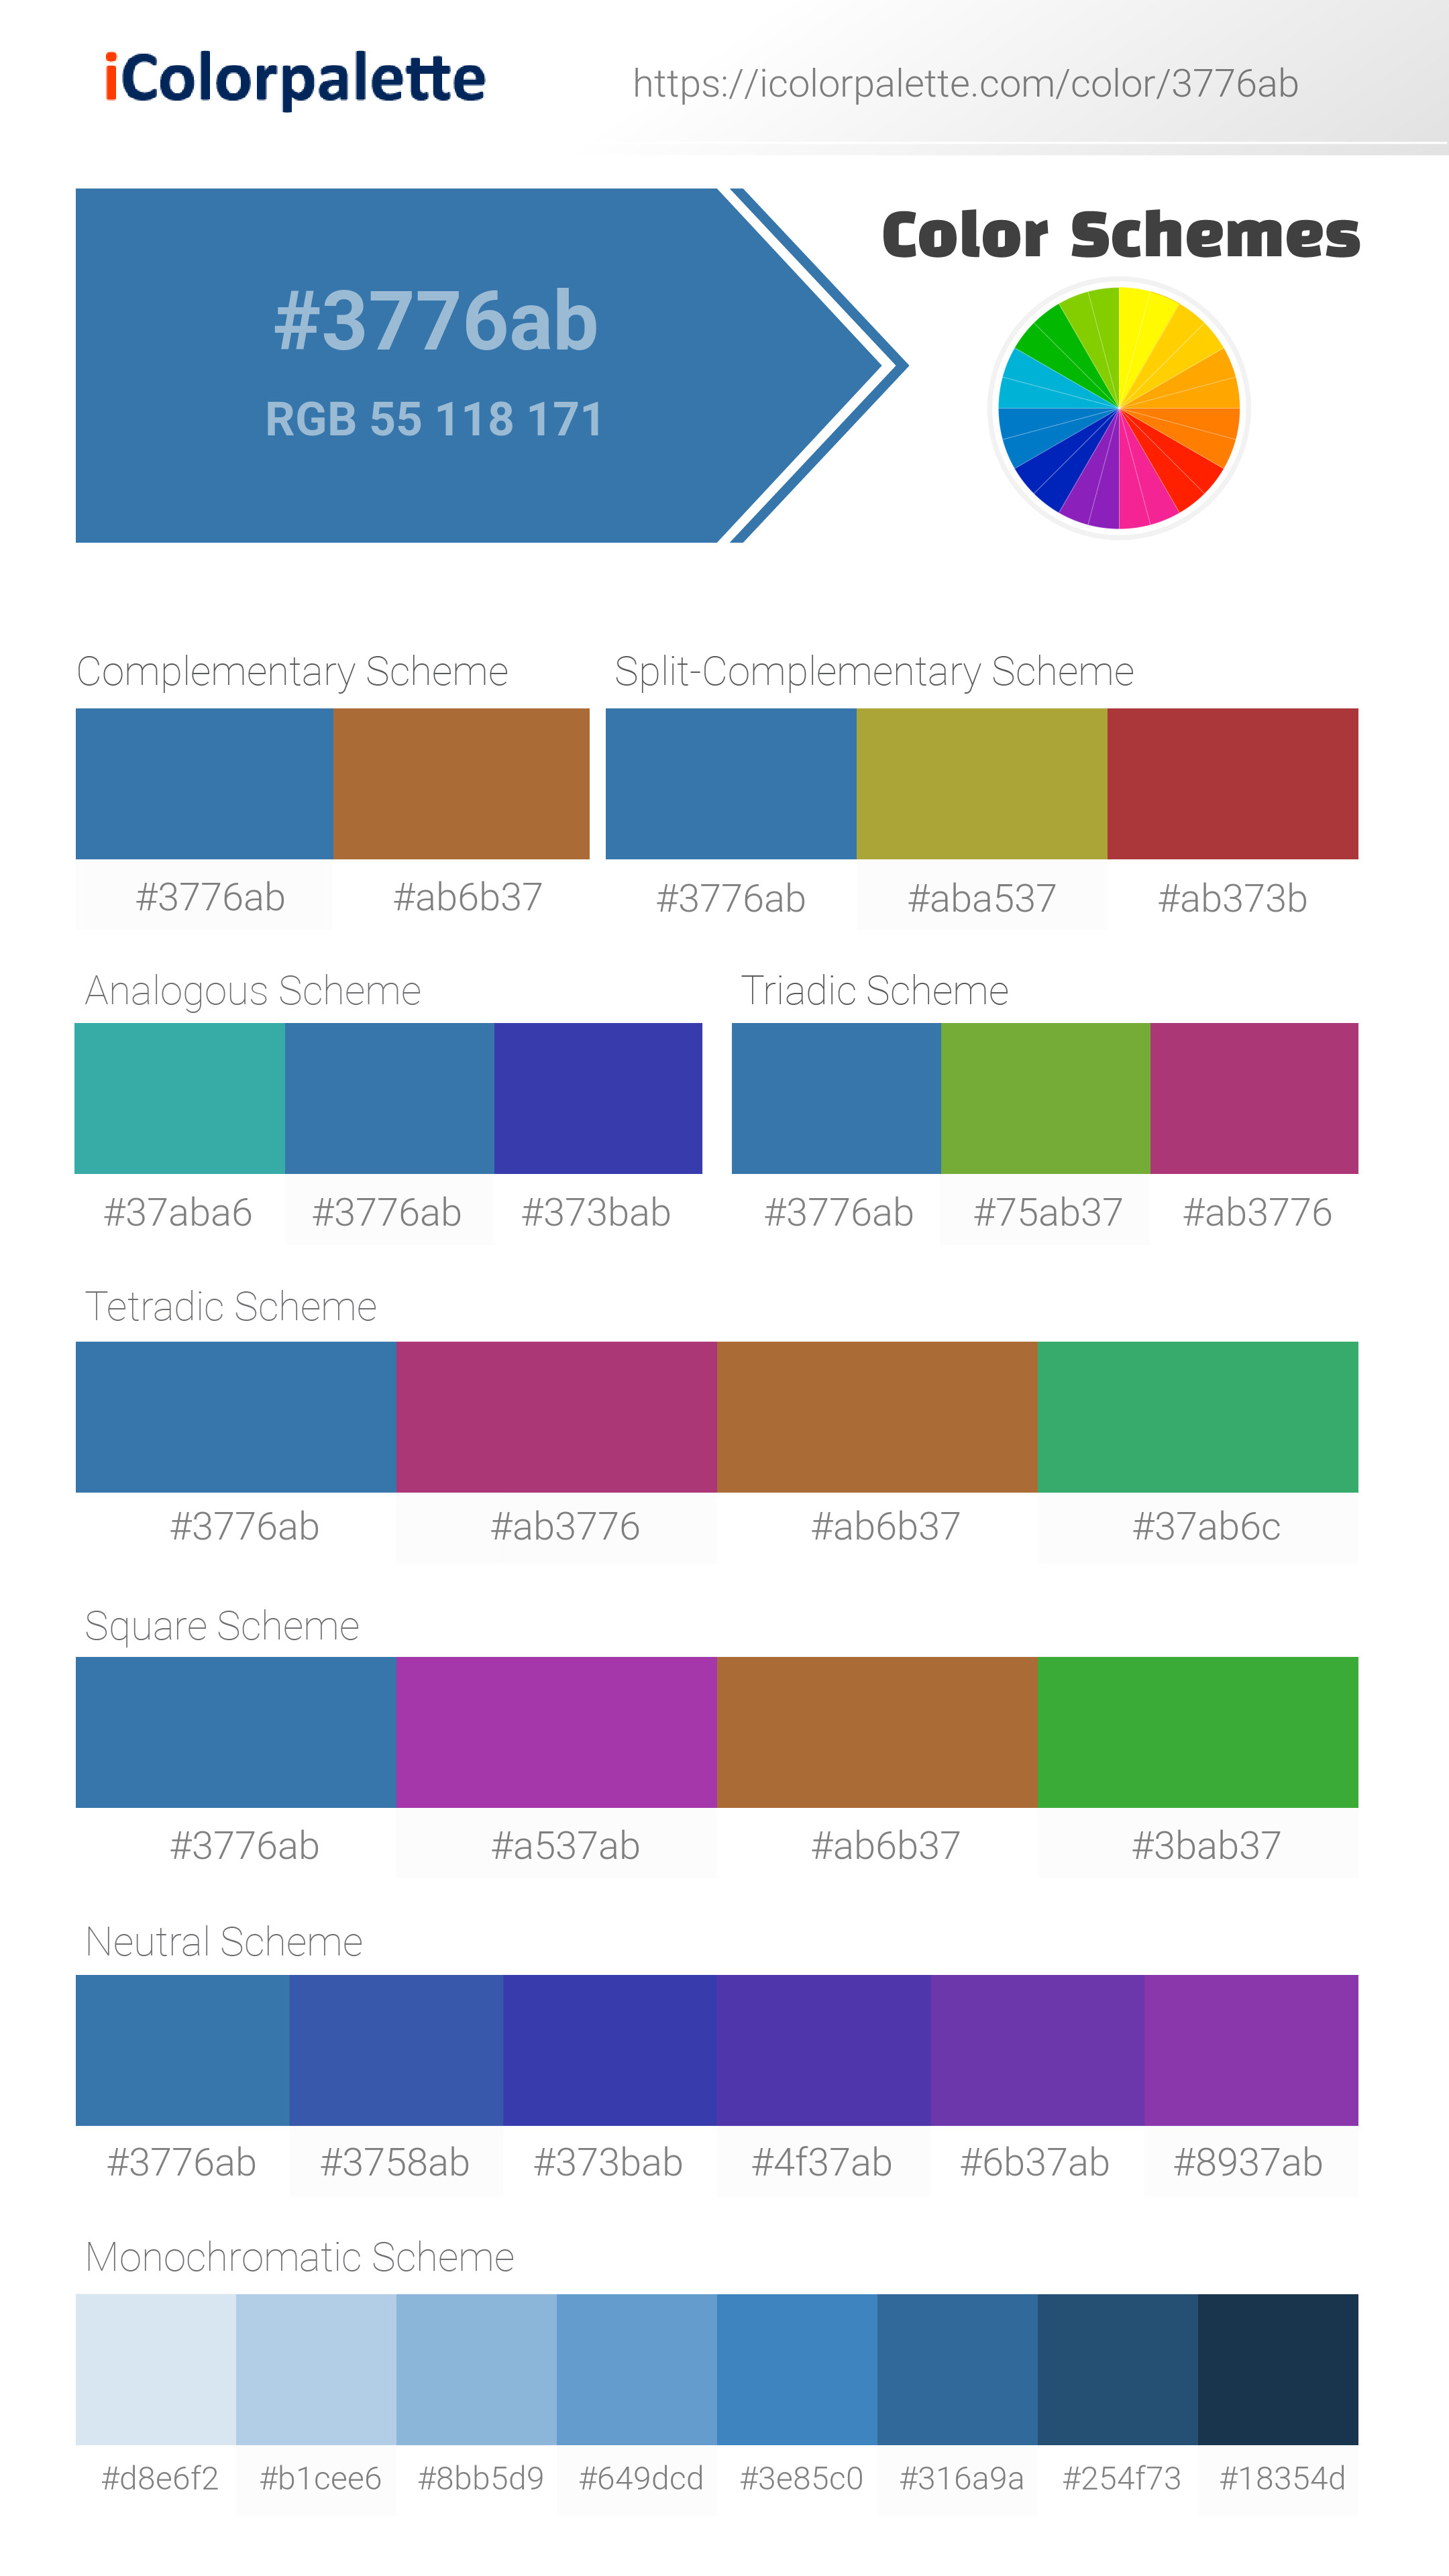 python color palette from image